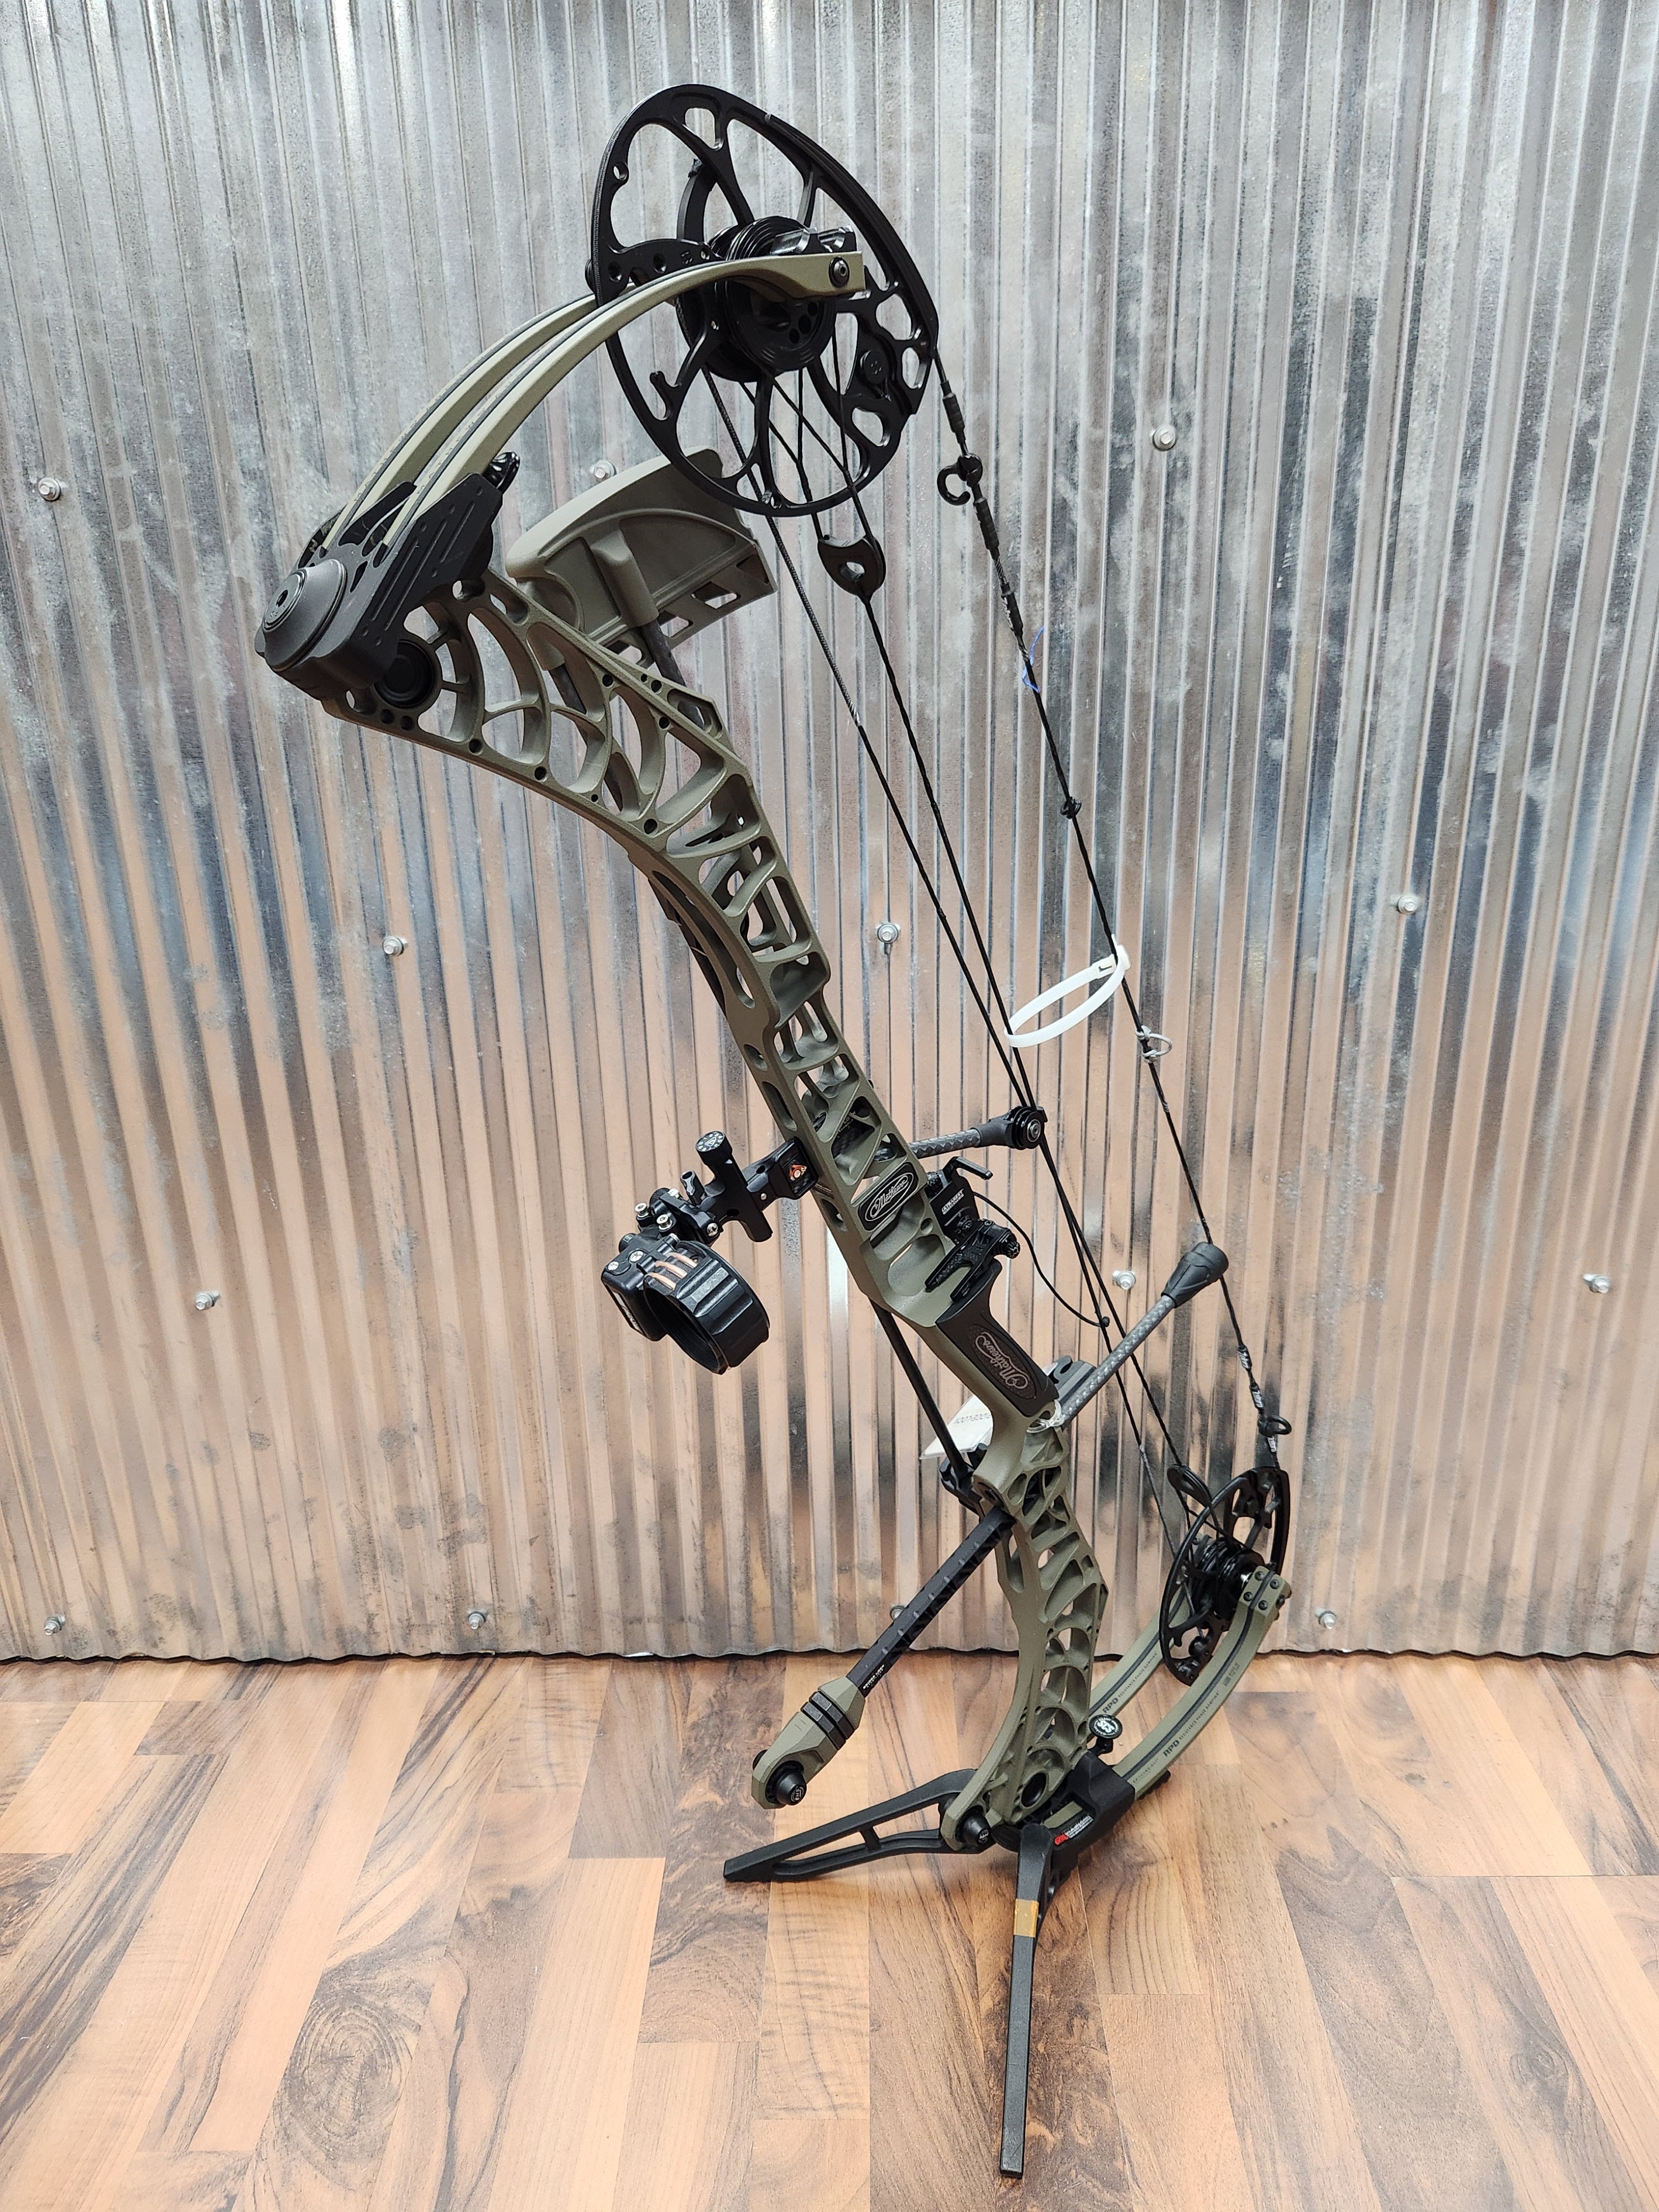 Mathews Phase 4 33 Level 3 Package *NEW FOR 2023 - Better Outdoors Pro Shop